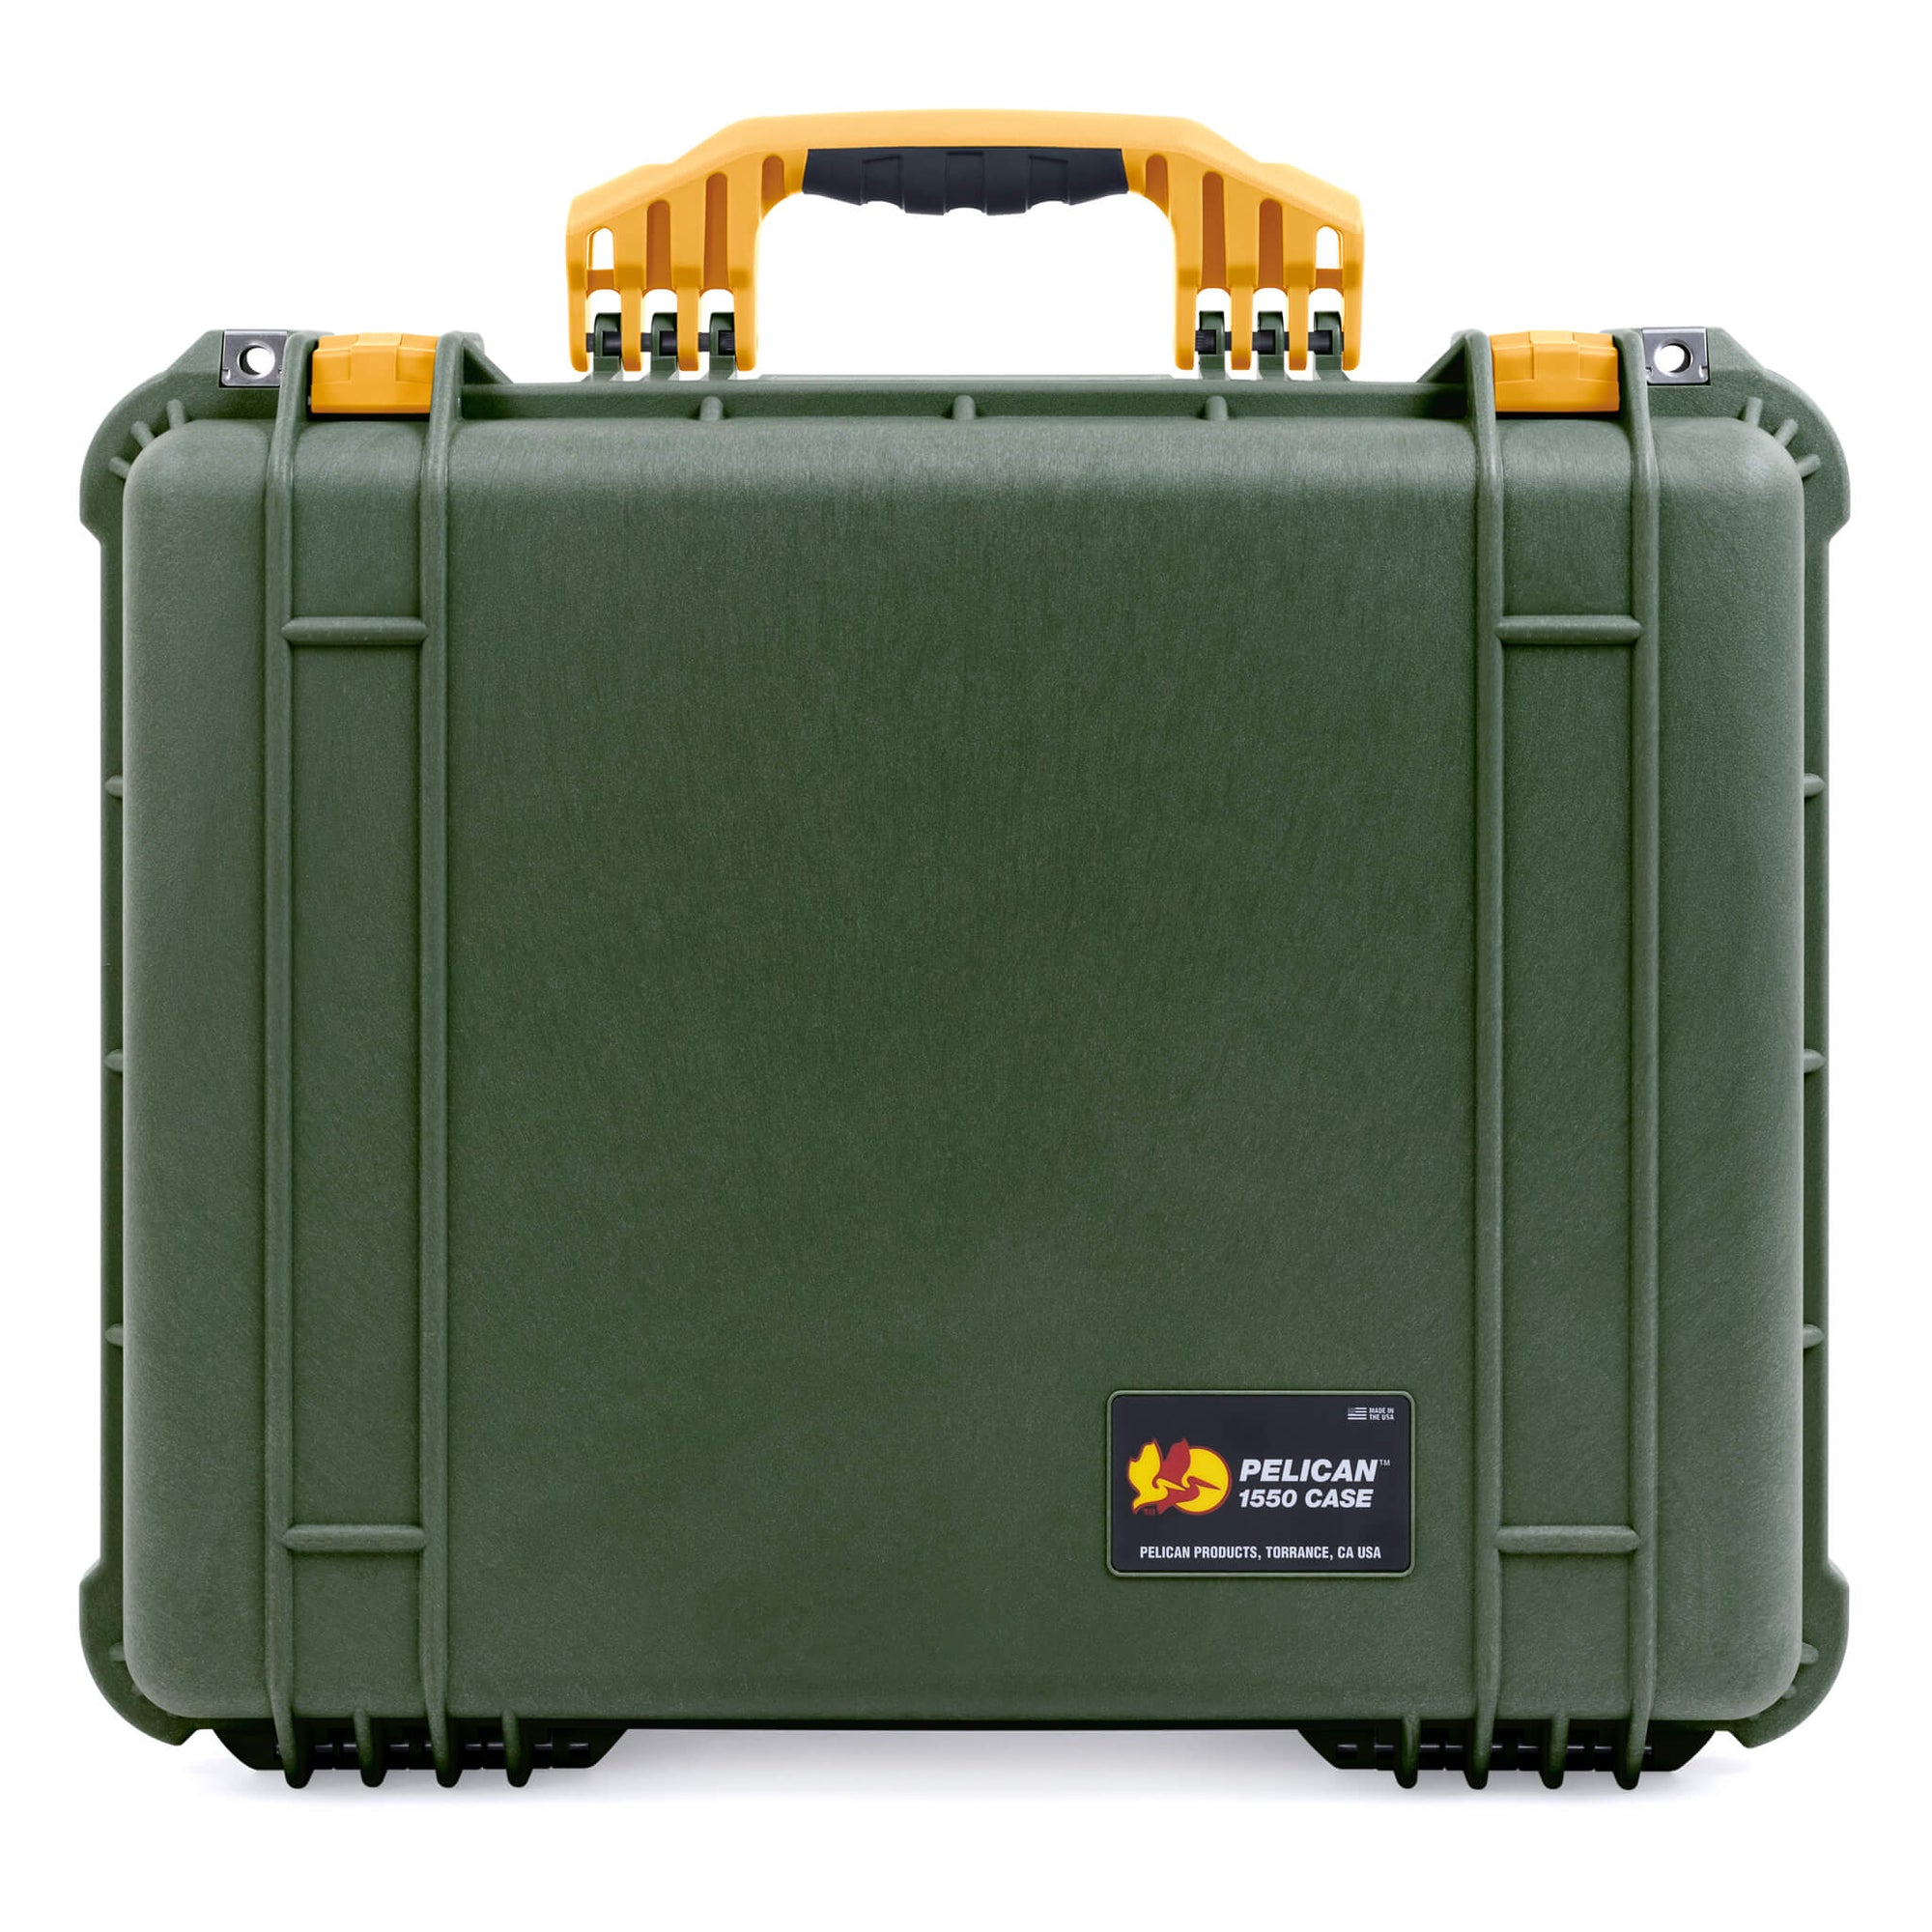 Pelican 1550 Case, OD Green with Yellow Handle & Latches ColorCase 